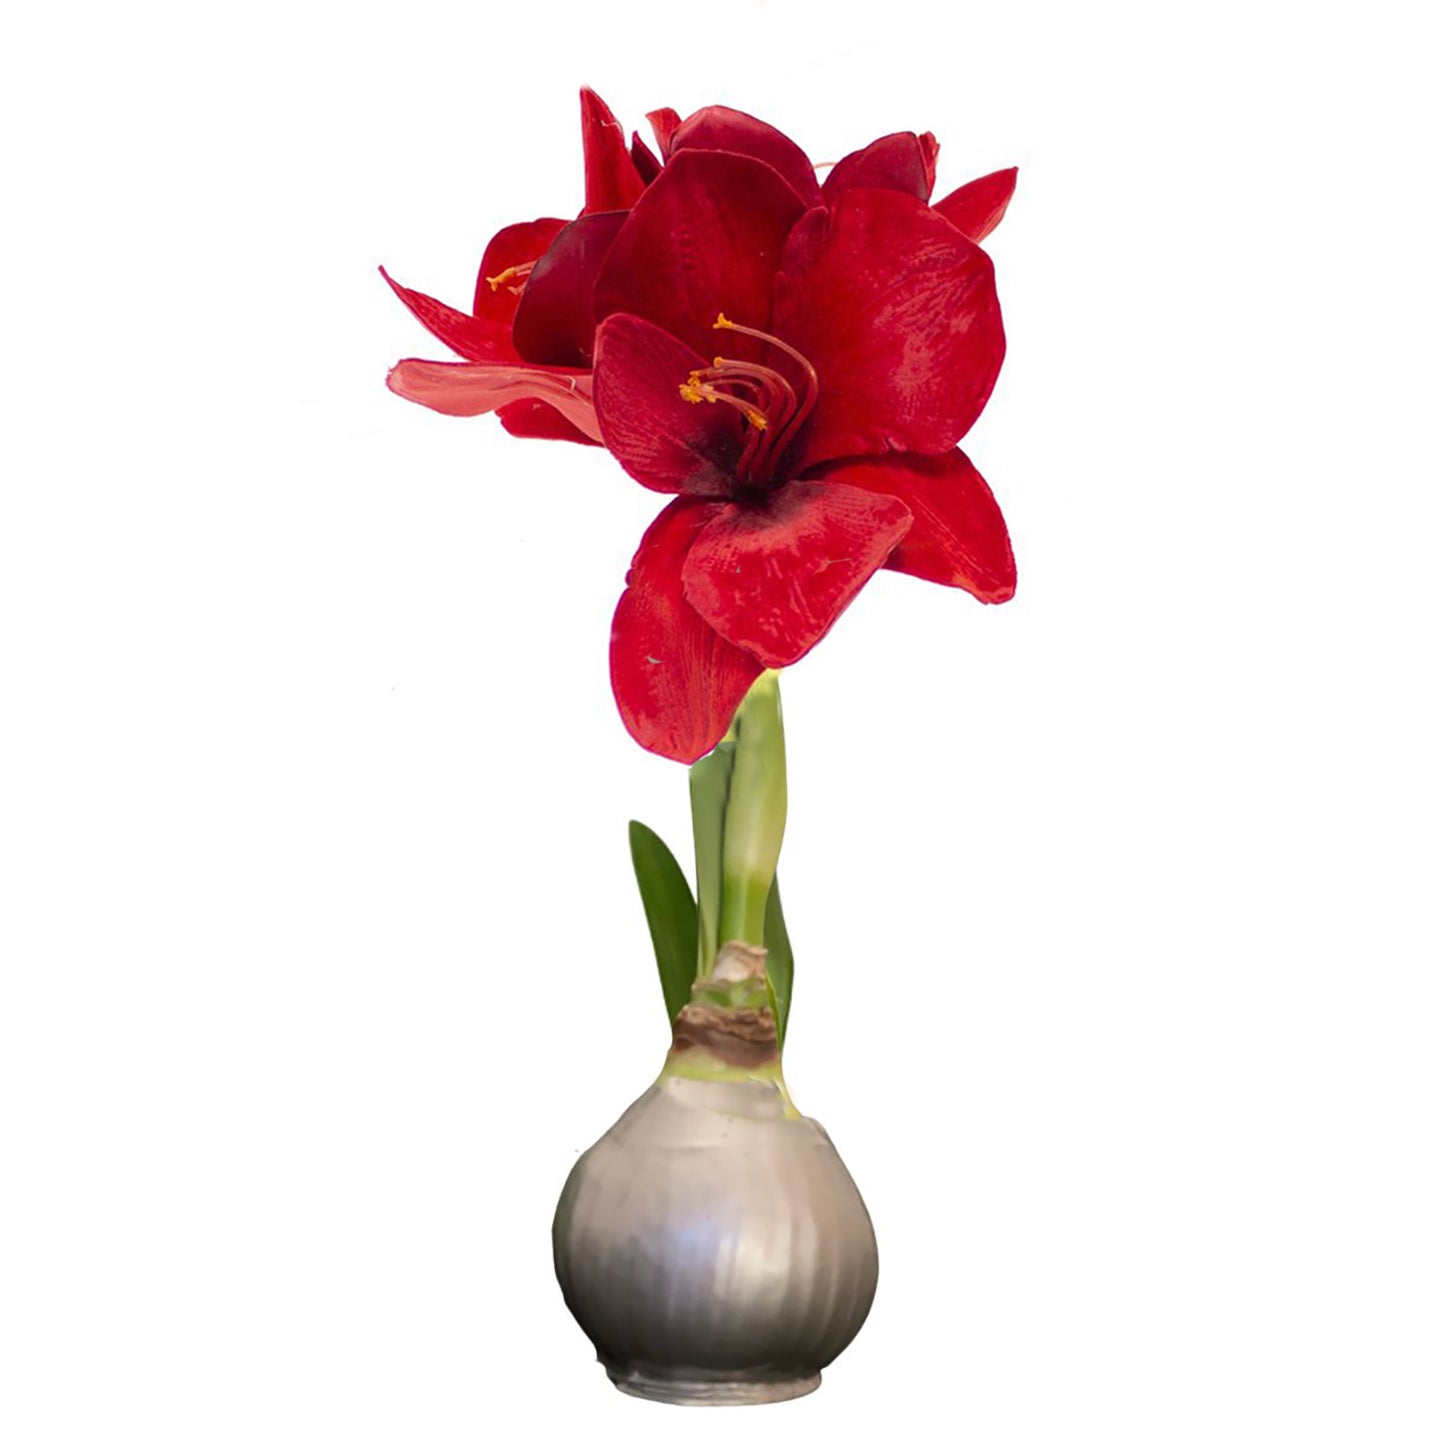 Silver Waxed Amaryllis Bulb, Red Bloom - Sold Out